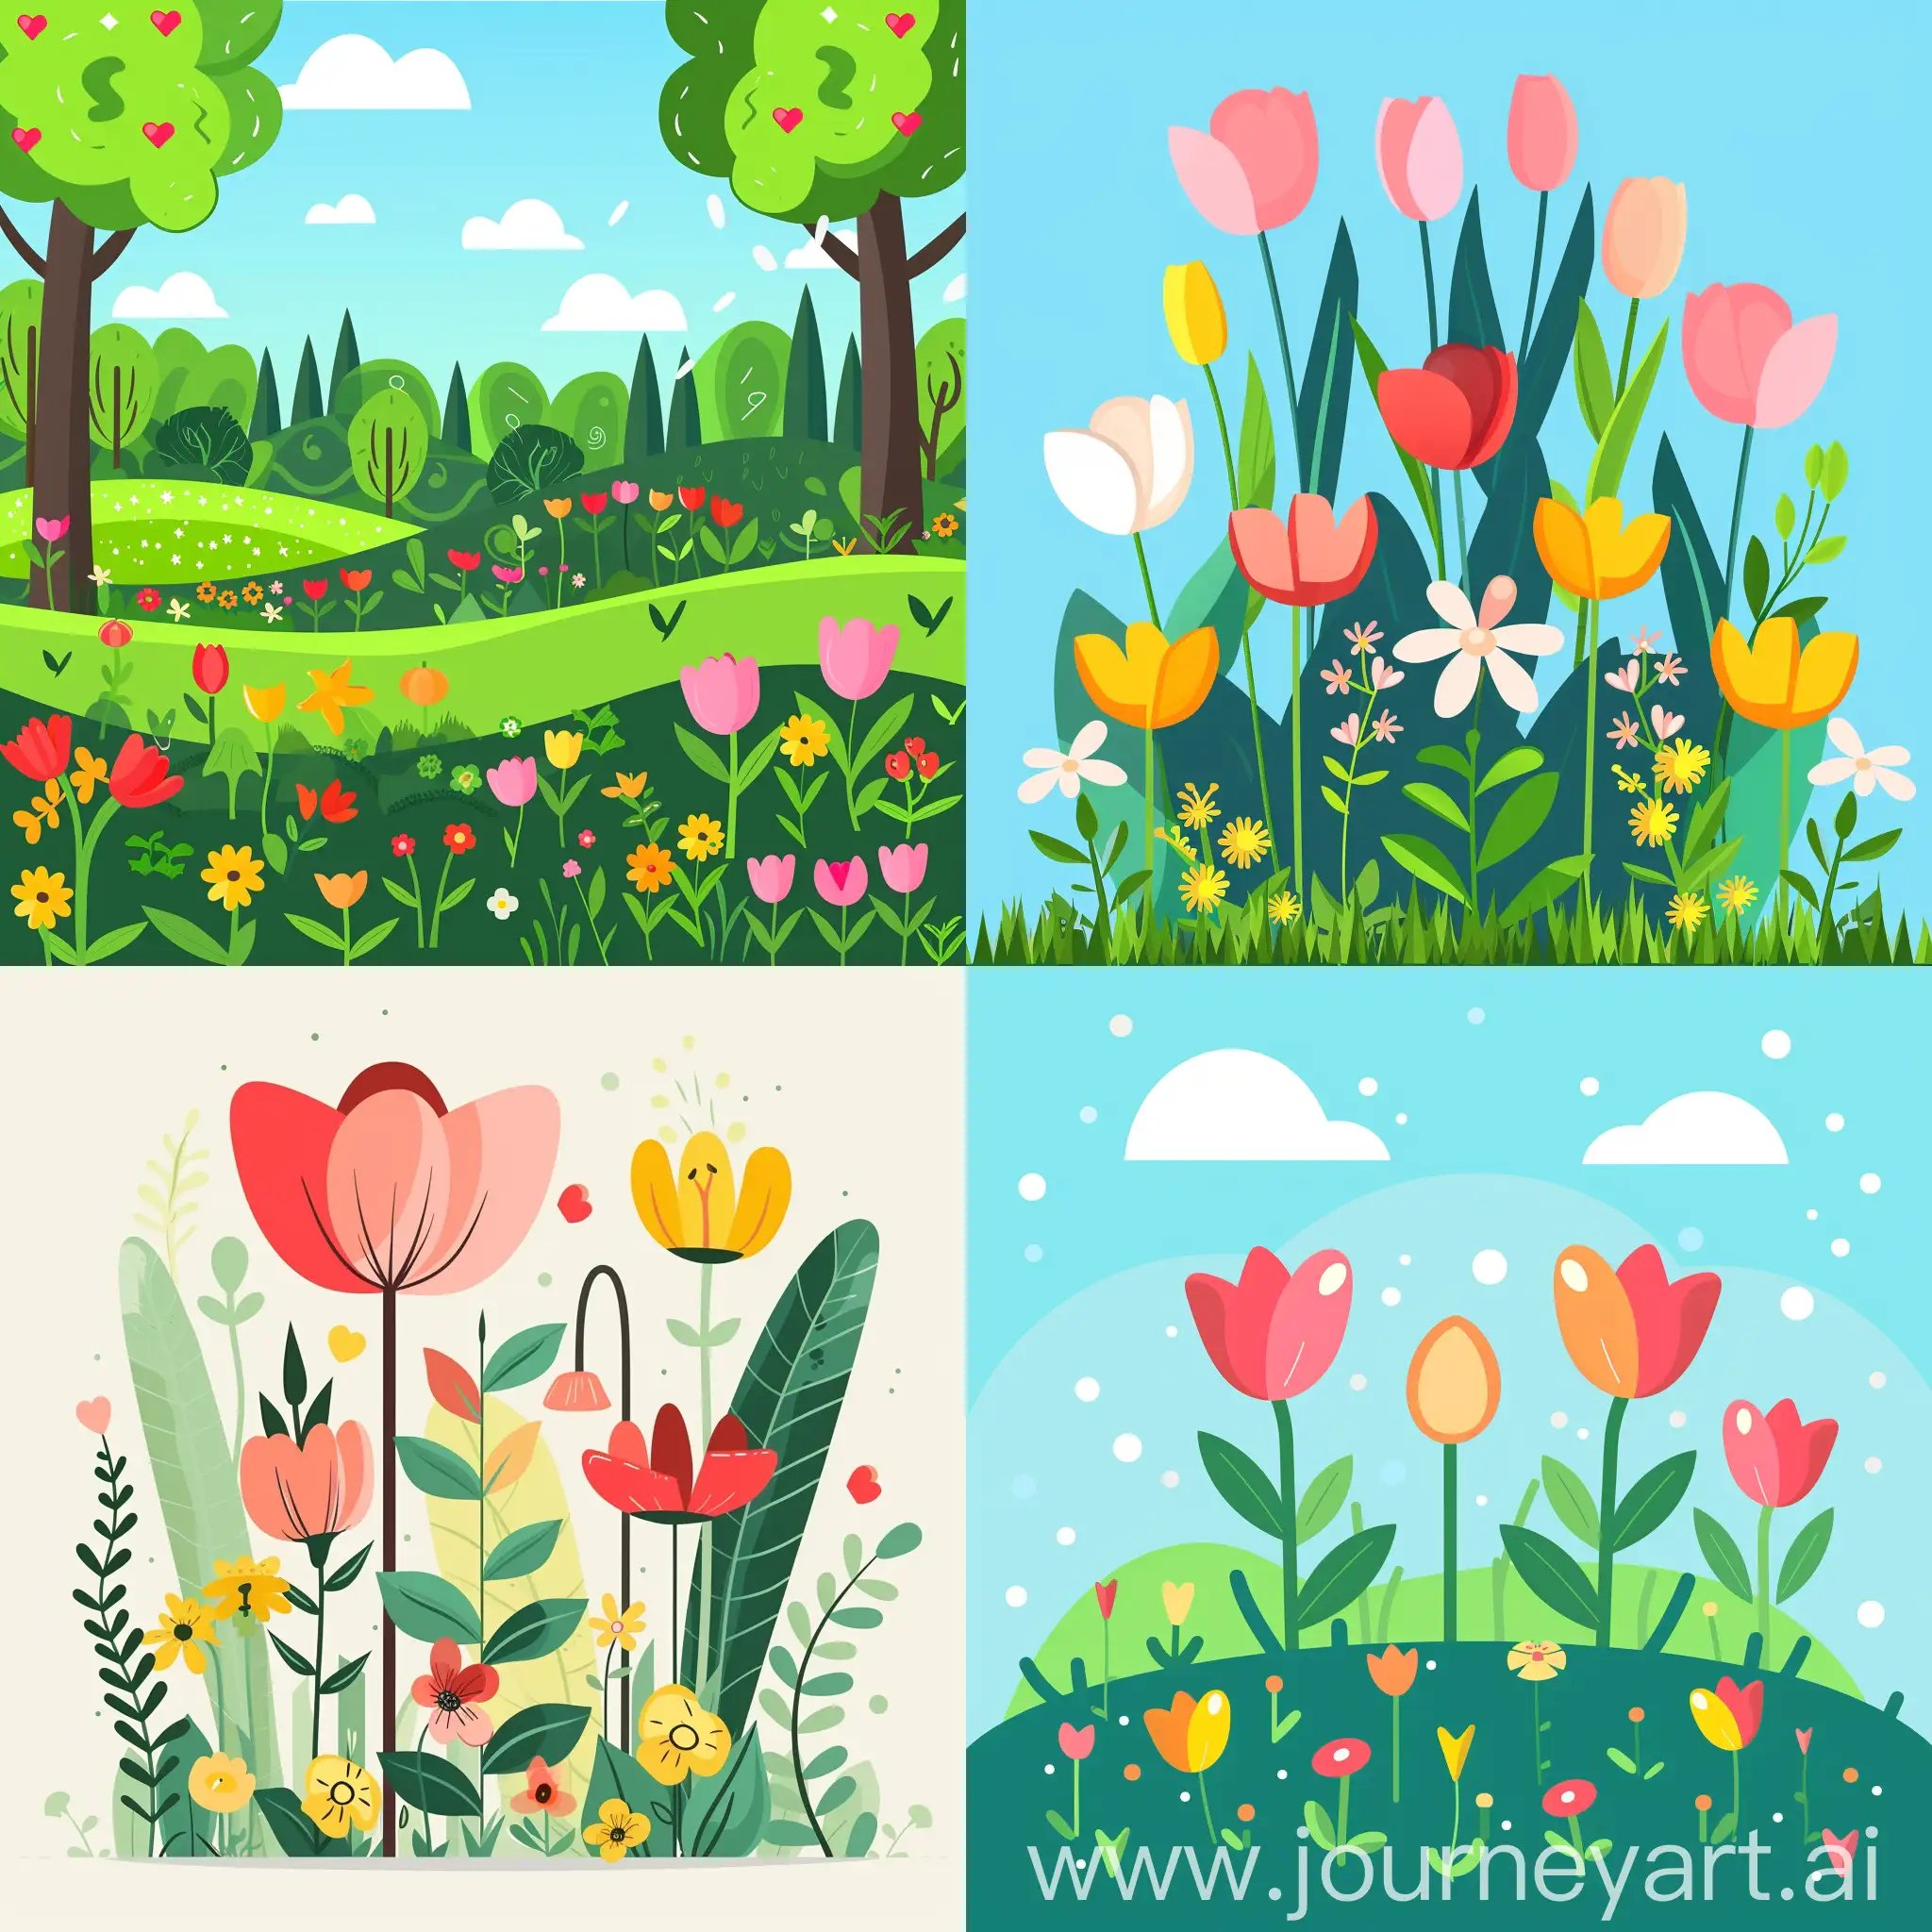 Colorful-Spring-Flowers-Illustration-in-High-Definition-Flat-Style